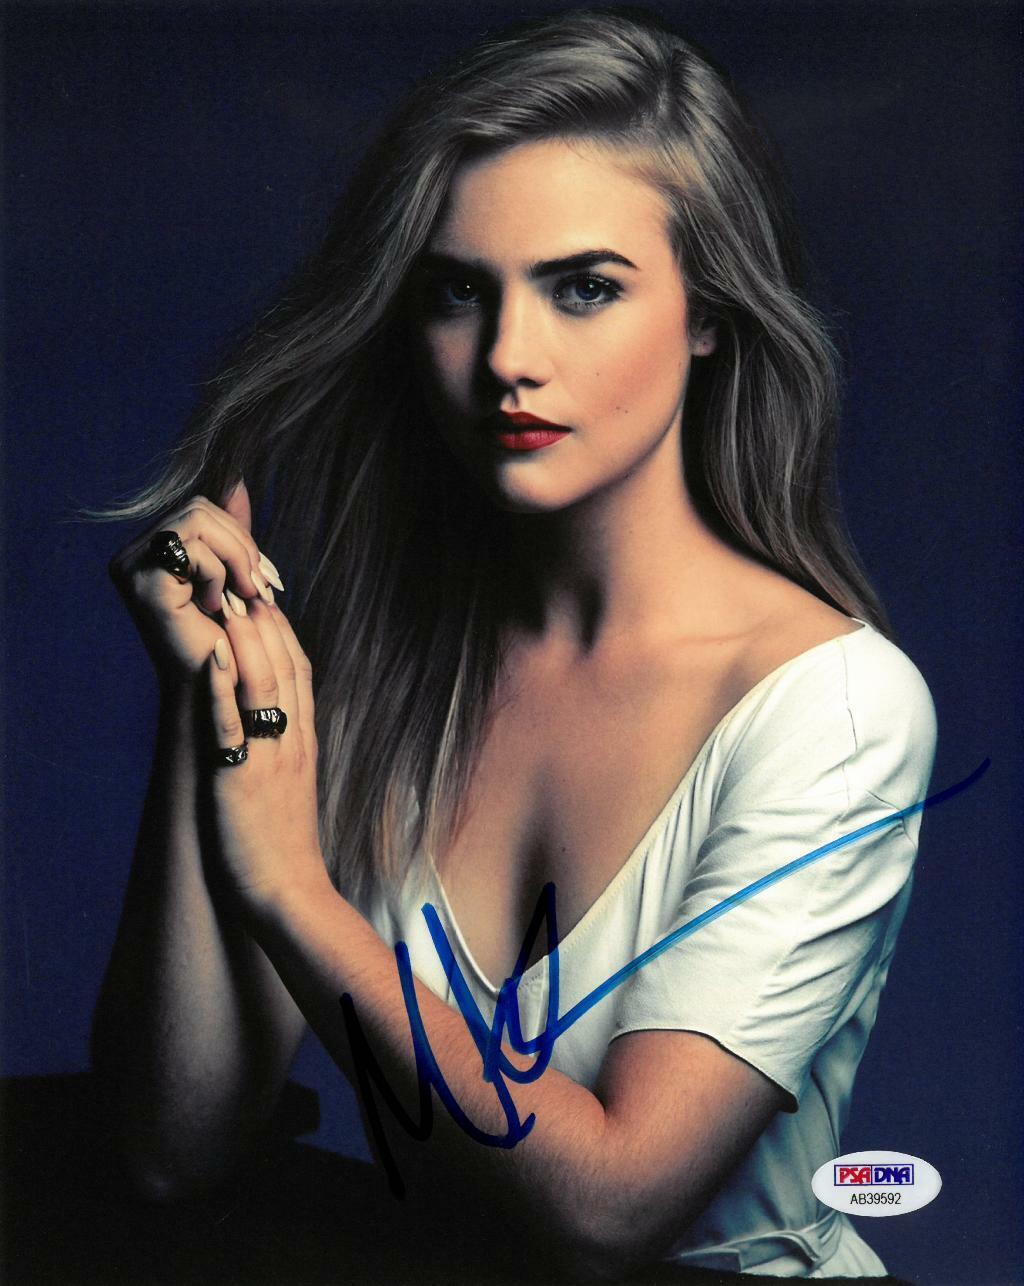 Maddie Hasson Signed Authentic Autographed 8x10 Photo Poster painting PSA/DNA #AB39592